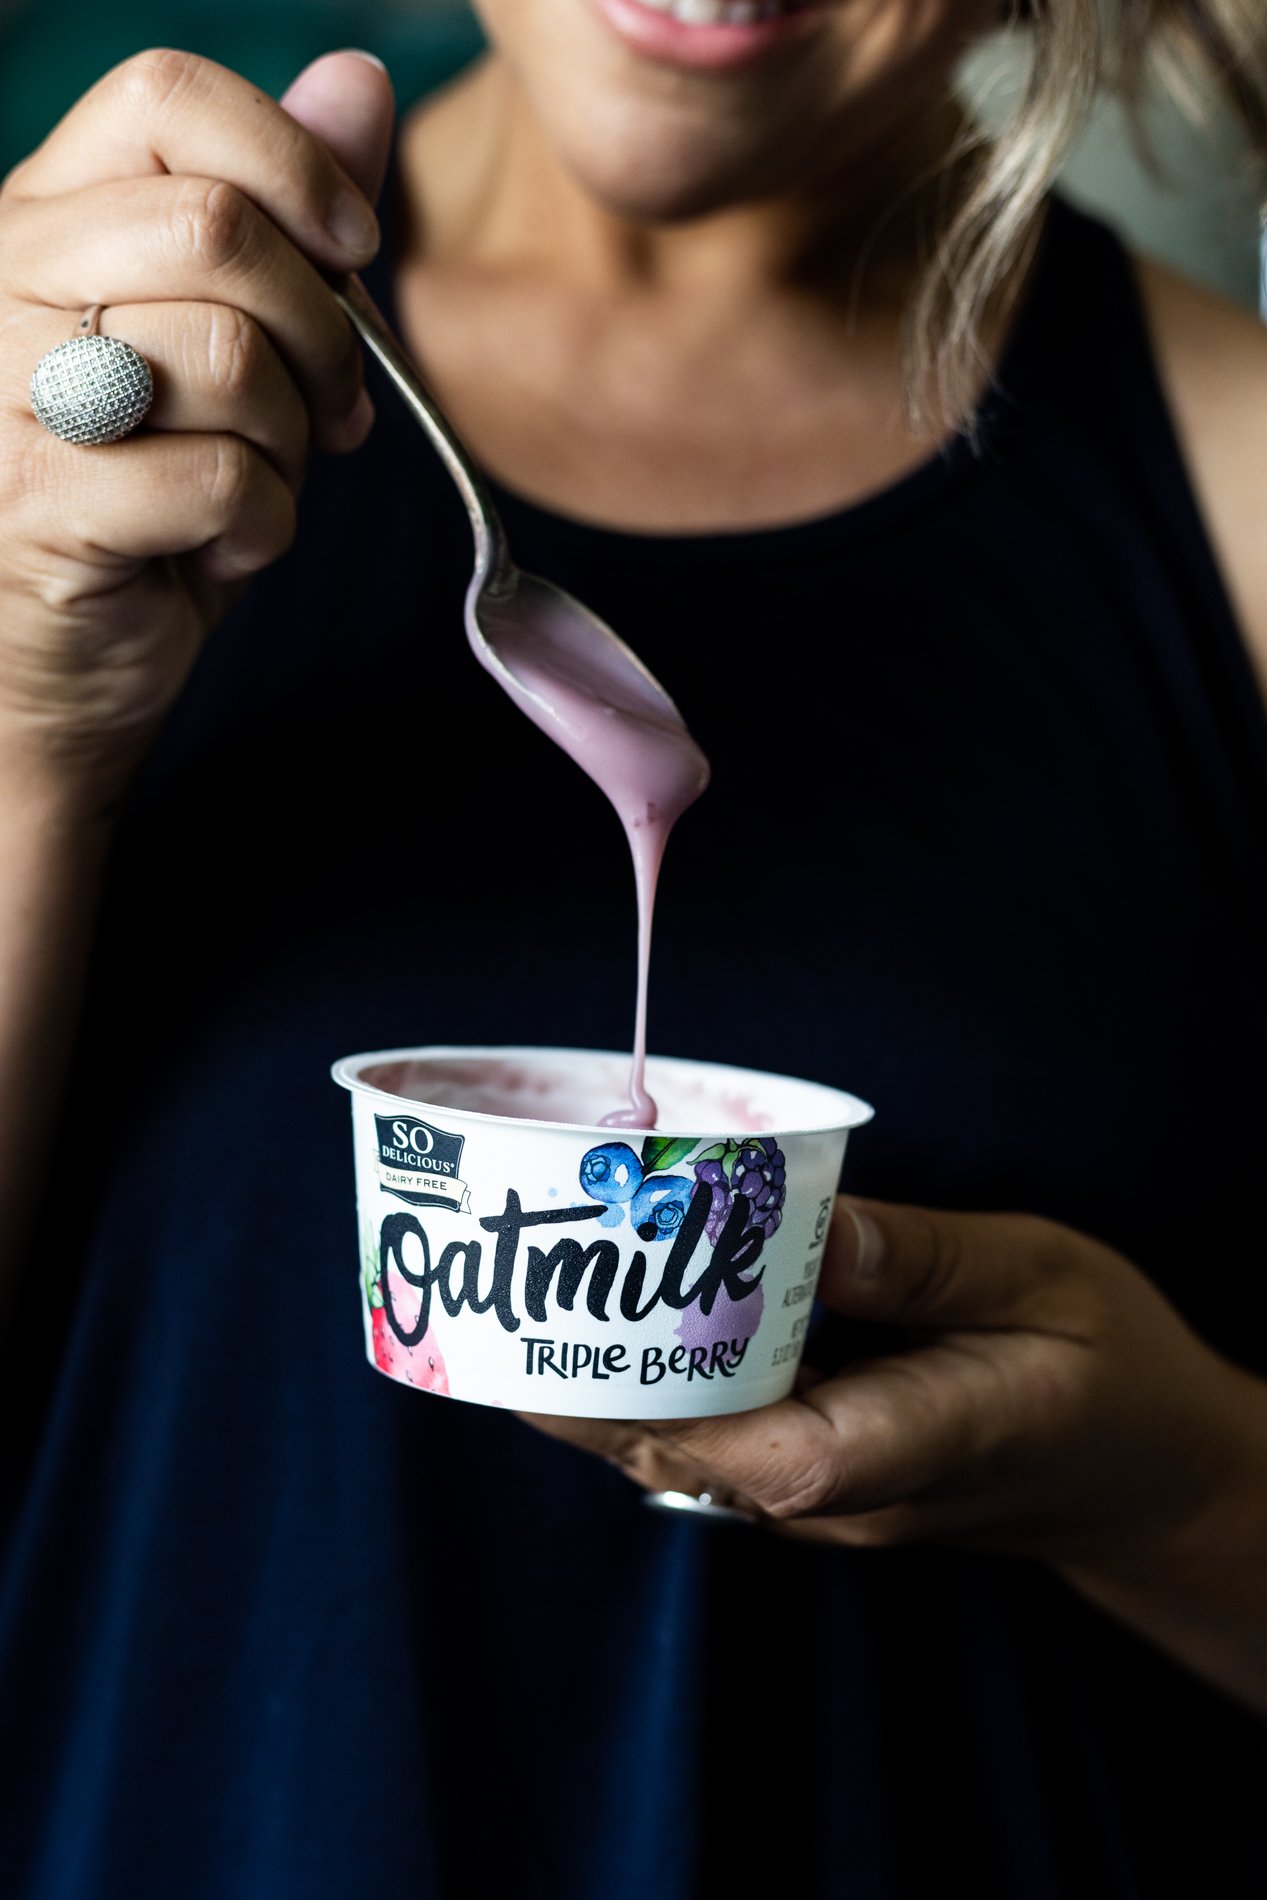 food blogger karly gomez holding a container of so delicious dairy free triple berry oatmilk yogurt alternative